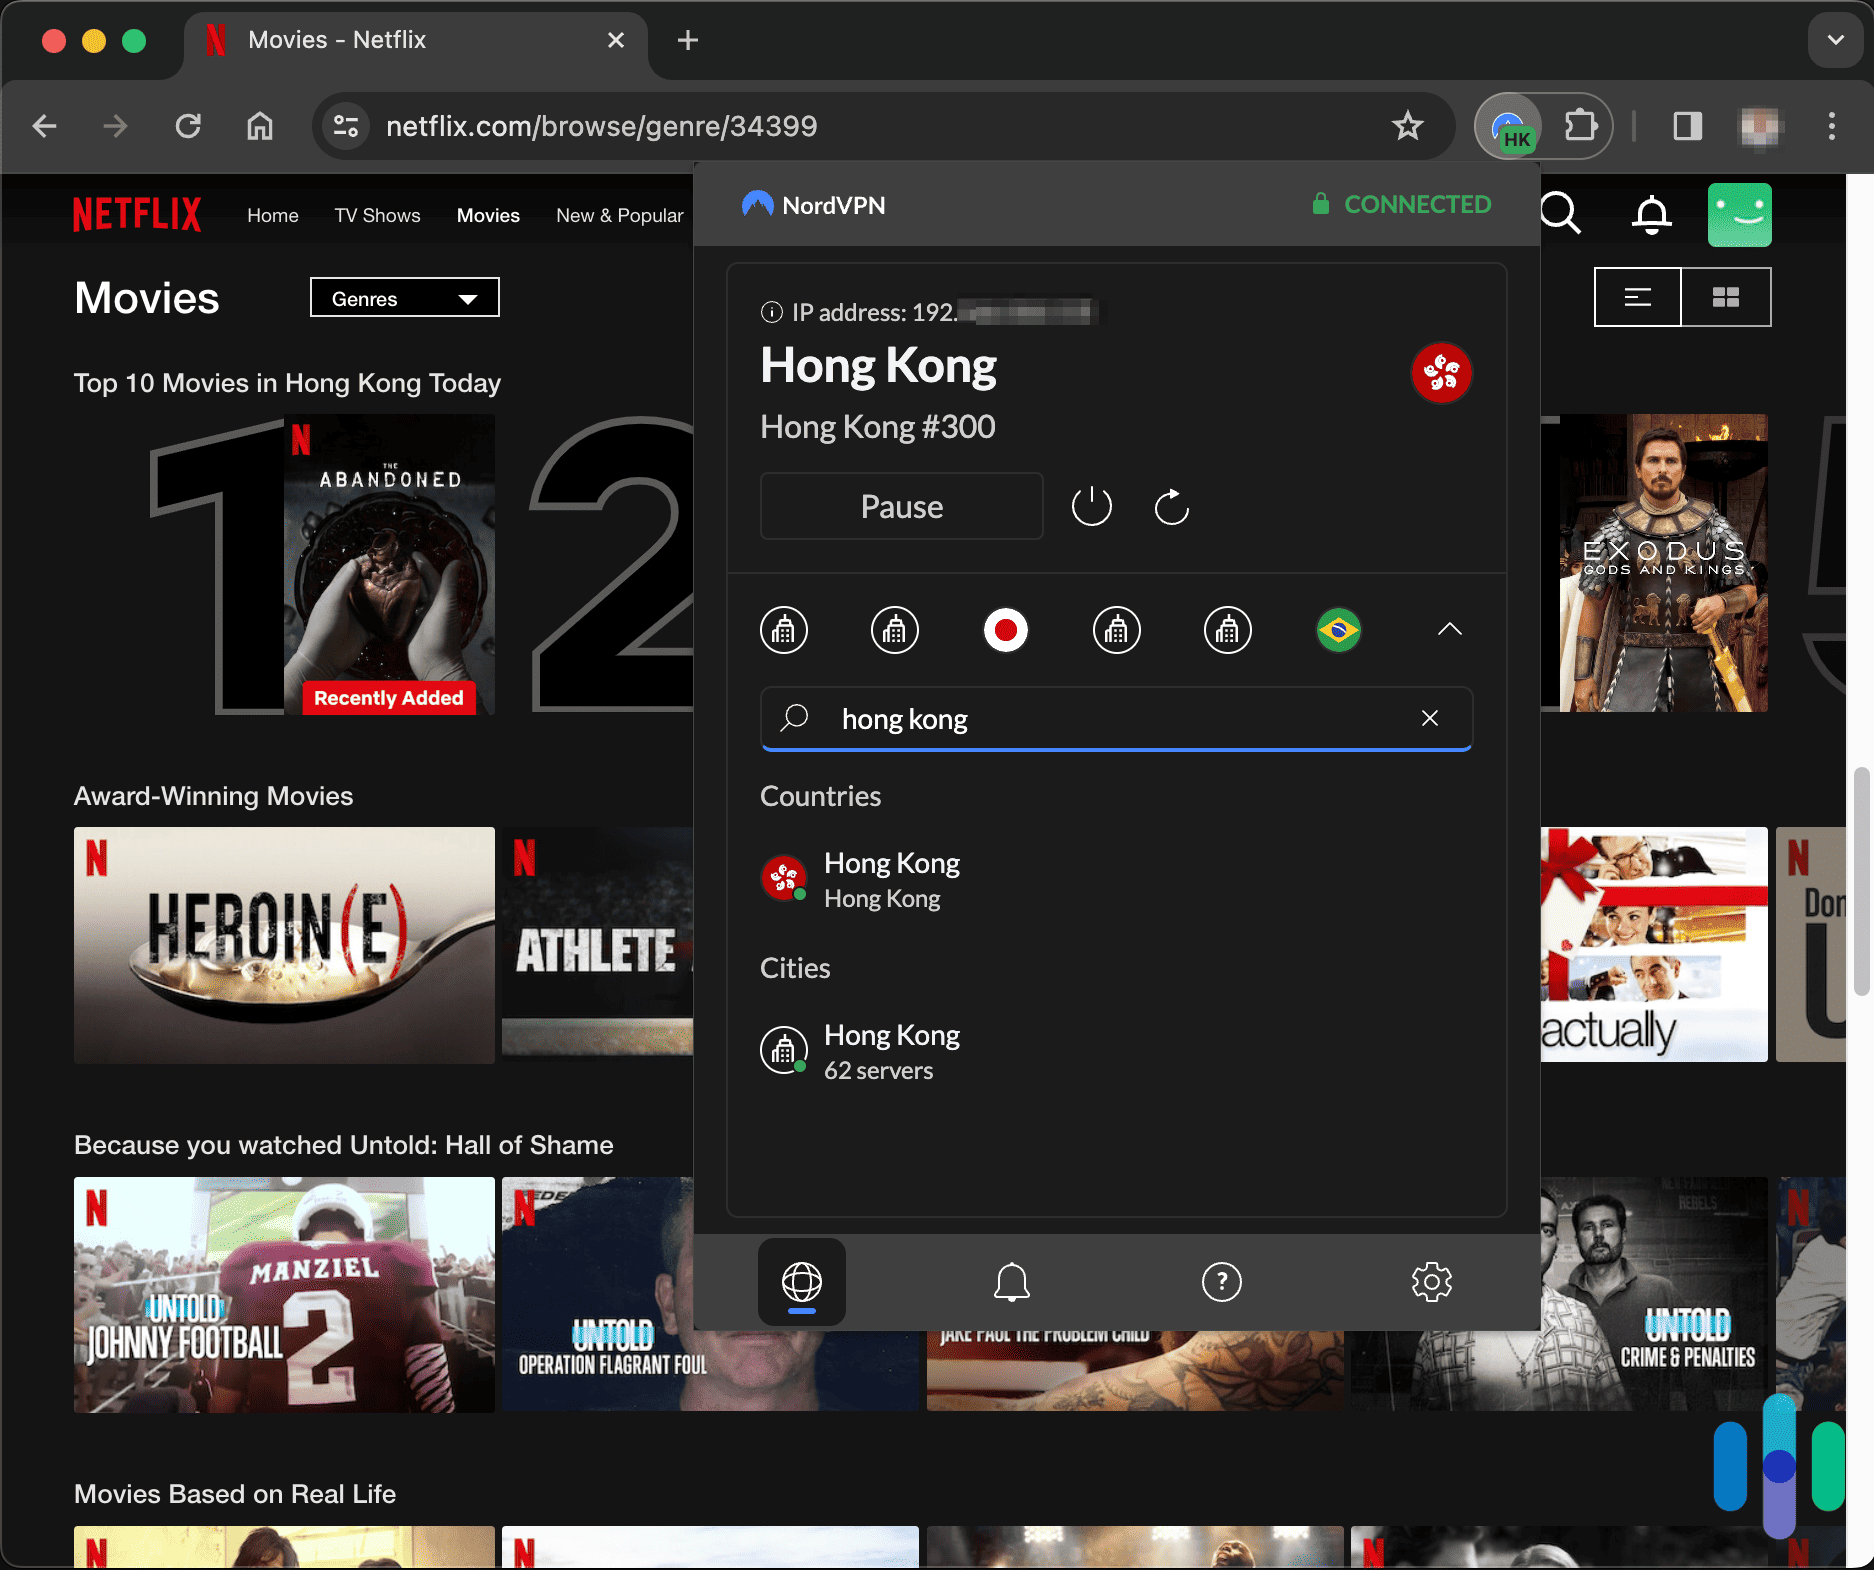 NordVPN with the Chrome extension connected to Hong Kong while on Netflix